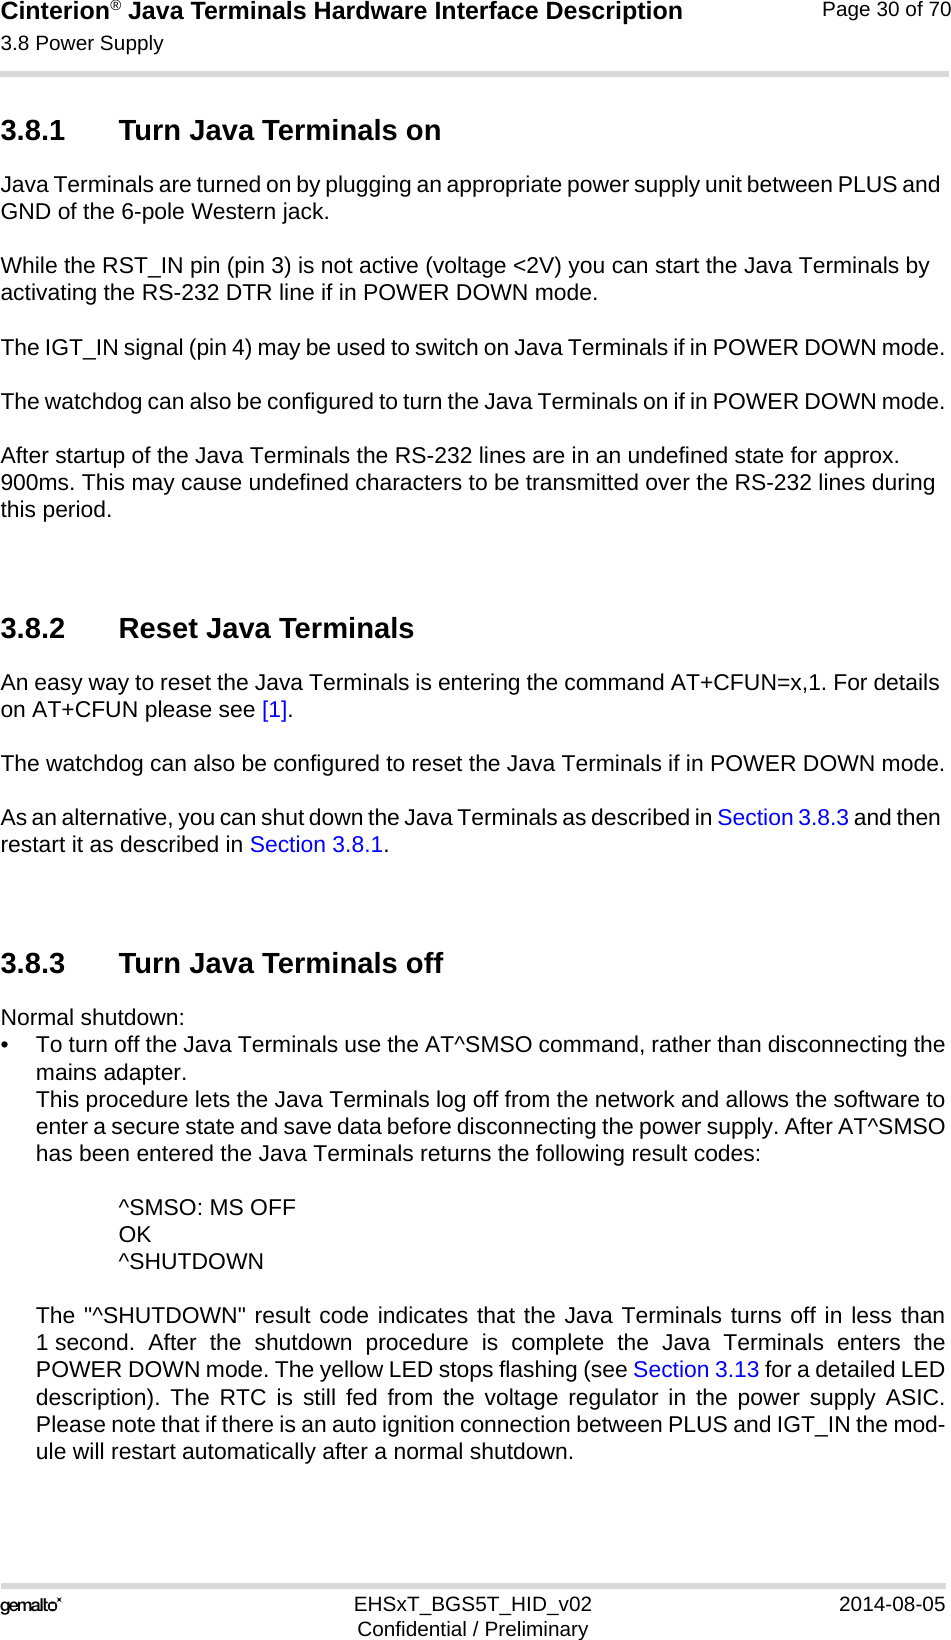 Cinterion® Java Terminals Hardware Interface Description3.8 Power Supply35EHSxT_BGS5T_HID_v02 2014-08-05Confidential / PreliminaryPage 30 of 703.8.1 Turn Java Terminals onJava Terminals are turned on by plugging an appropriate power supply unit between PLUS and GND of the 6-pole Western jack. While the RST_IN pin (pin 3) is not active (voltage &lt;2V) you can start the Java Terminals by activating the RS-232 DTR line if in POWER DOWN mode.The IGT_IN signal (pin 4) may be used to switch on Java Terminals if in POWER DOWN mode.The watchdog can also be configured to turn the Java Terminals on if in POWER DOWN mode.After startup of the Java Terminals the RS-232 lines are in an undefined state for approx. 900ms. This may cause undefined characters to be transmitted over the RS-232 lines during this period.3.8.2 Reset Java TerminalsAn easy way to reset the Java Terminals is entering the command AT+CFUN=x,1. For details on AT+CFUN please see [1].The watchdog can also be configured to reset the Java Terminals if in POWER DOWN mode.As an alternative, you can shut down the Java Terminals as described in Section 3.8.3 and then restart it as described in Section 3.8.1.3.8.3 Turn Java Terminals offNormal shutdown:• To turn off the Java Terminals use the AT^SMSO command, rather than disconnecting themains adapter. This procedure lets the Java Terminals log off from the network and allows the software toenter a secure state and save data before disconnecting the power supply. After AT^SMSOhas been entered the Java Terminals returns the following result codes: ^SMSO: MS OFFOK^SHUTDOWNThe &quot;^SHUTDOWN&quot; result code indicates that the Java Terminals turns off in less than1 second. After the shutdown procedure is complete the Java Terminals enters thePOWER DOWN mode. The yellow LED stops flashing (see Section 3.13 for a detailed LEDdescription). The RTC is still fed from the voltage regulator in the power supply ASIC.Please note that if there is an auto ignition connection between PLUS and IGT_IN the mod-ule will restart automatically after a normal shutdown.